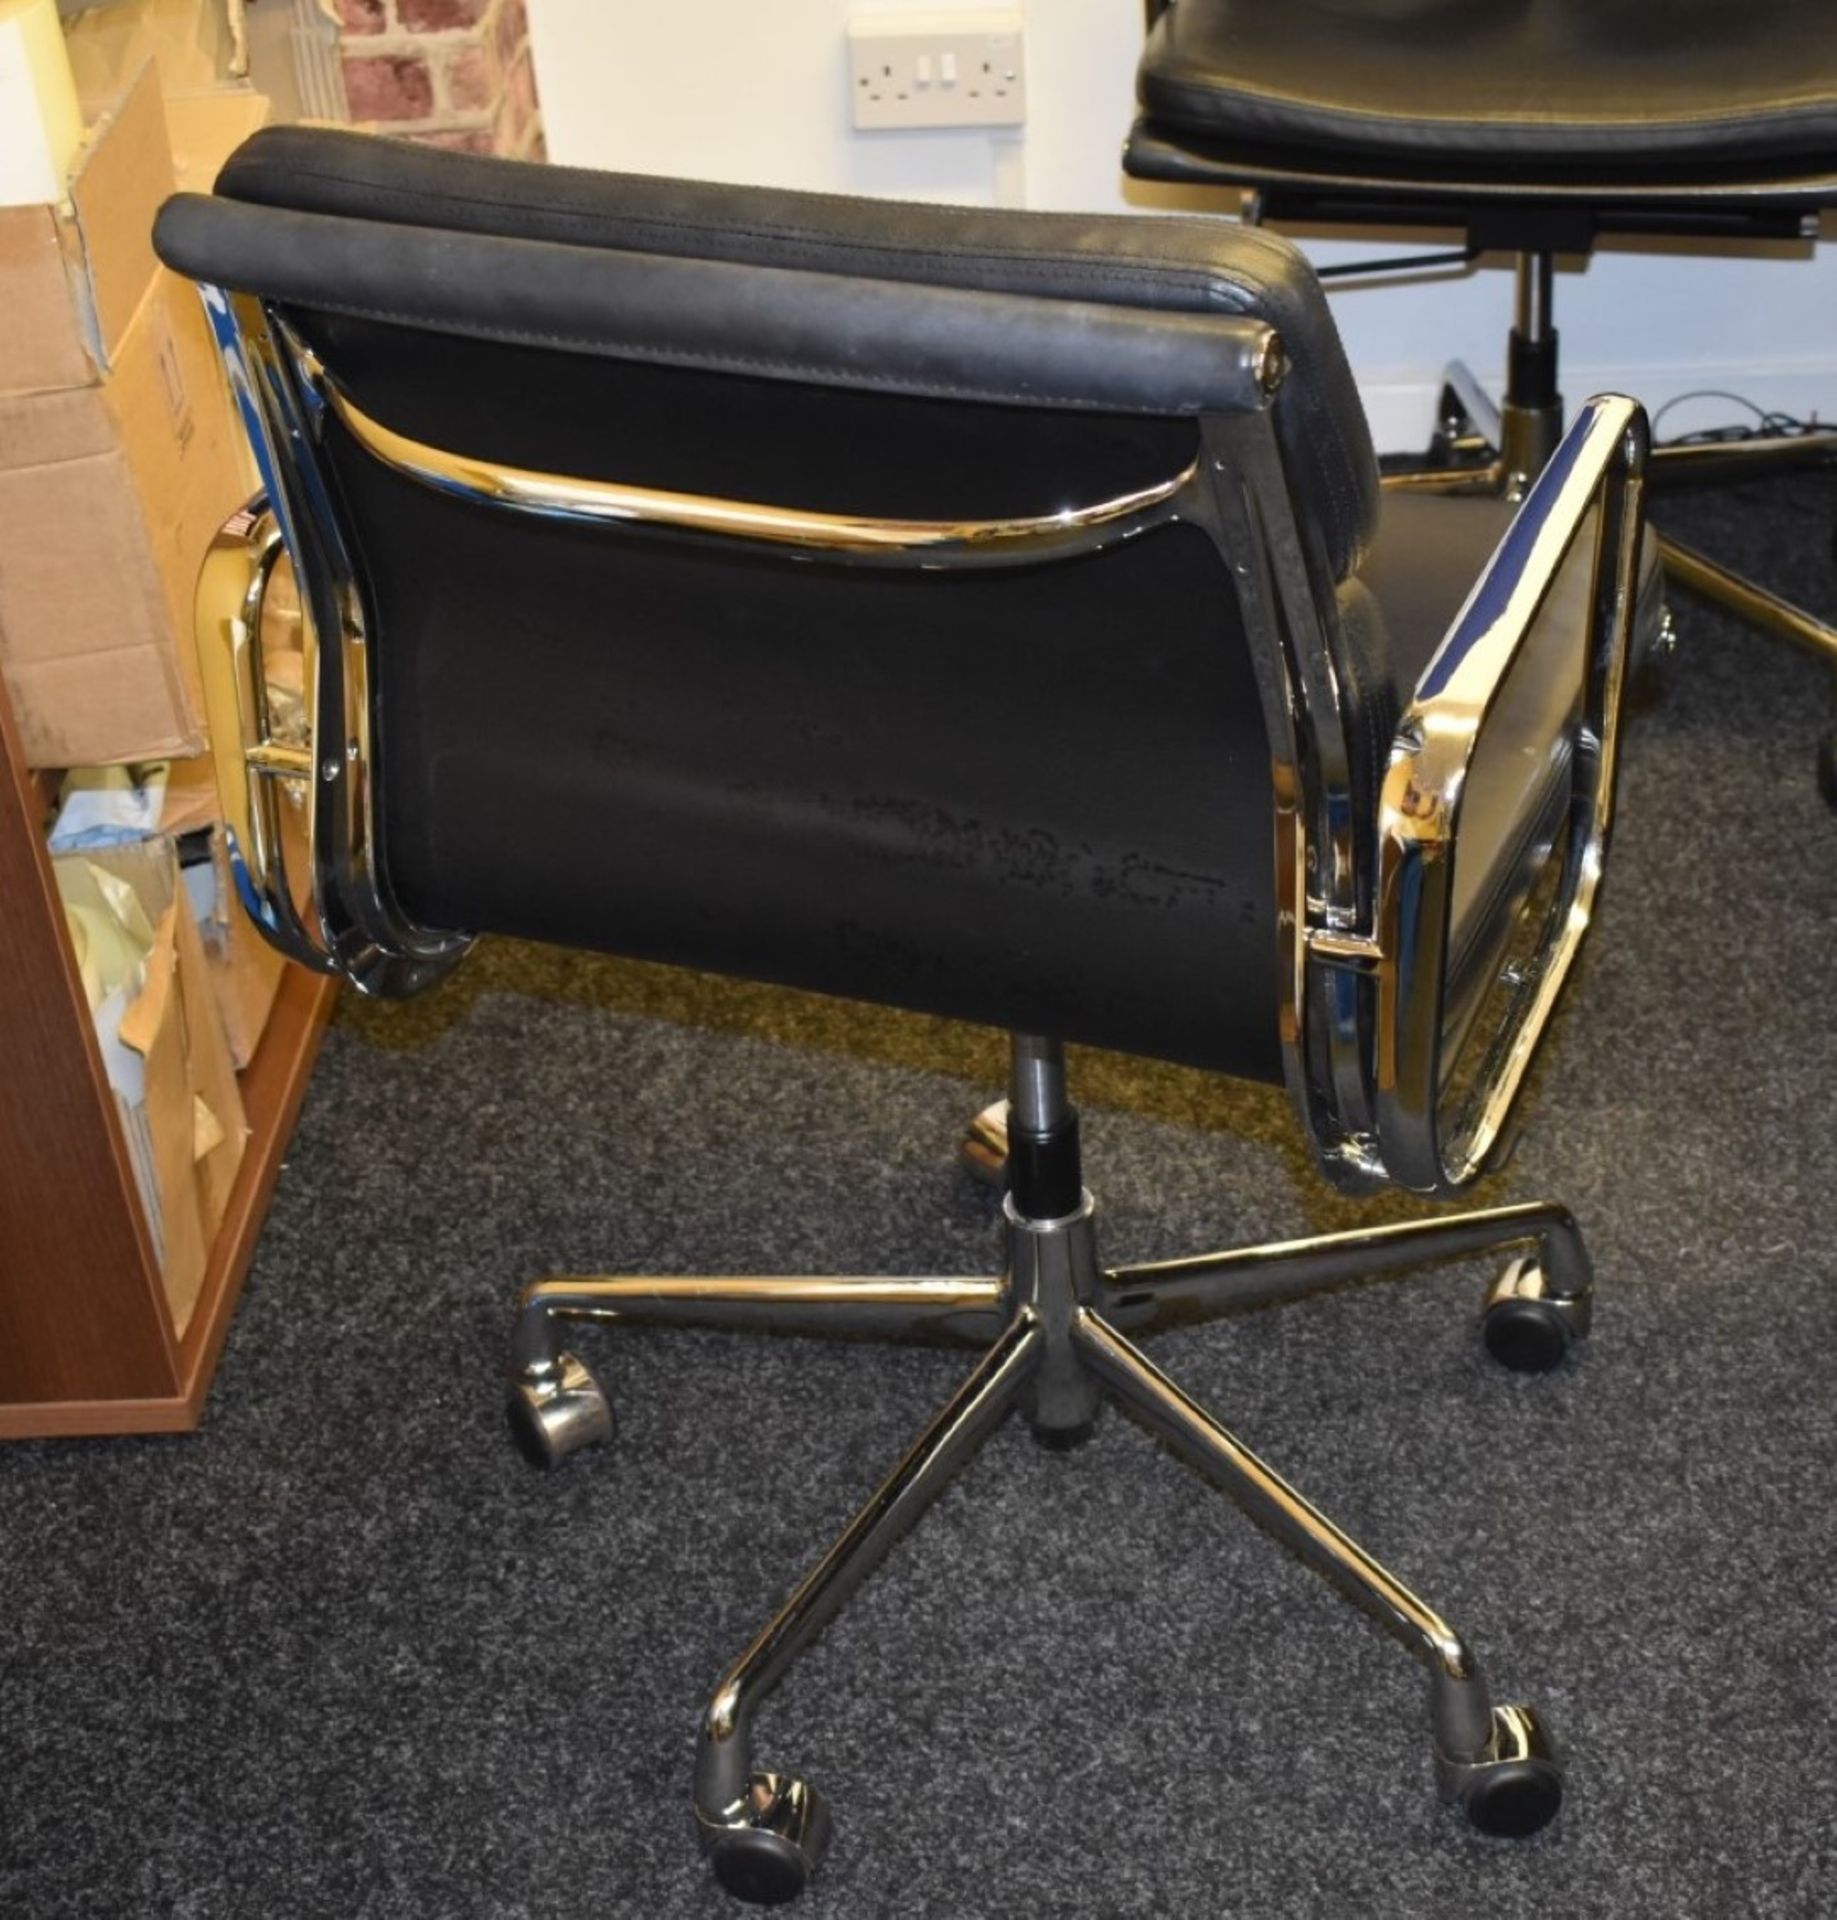 1 x Eames Inspired Office Chair - Swivel Office Chair Upholstered in Black Leather - Image 6 of 6